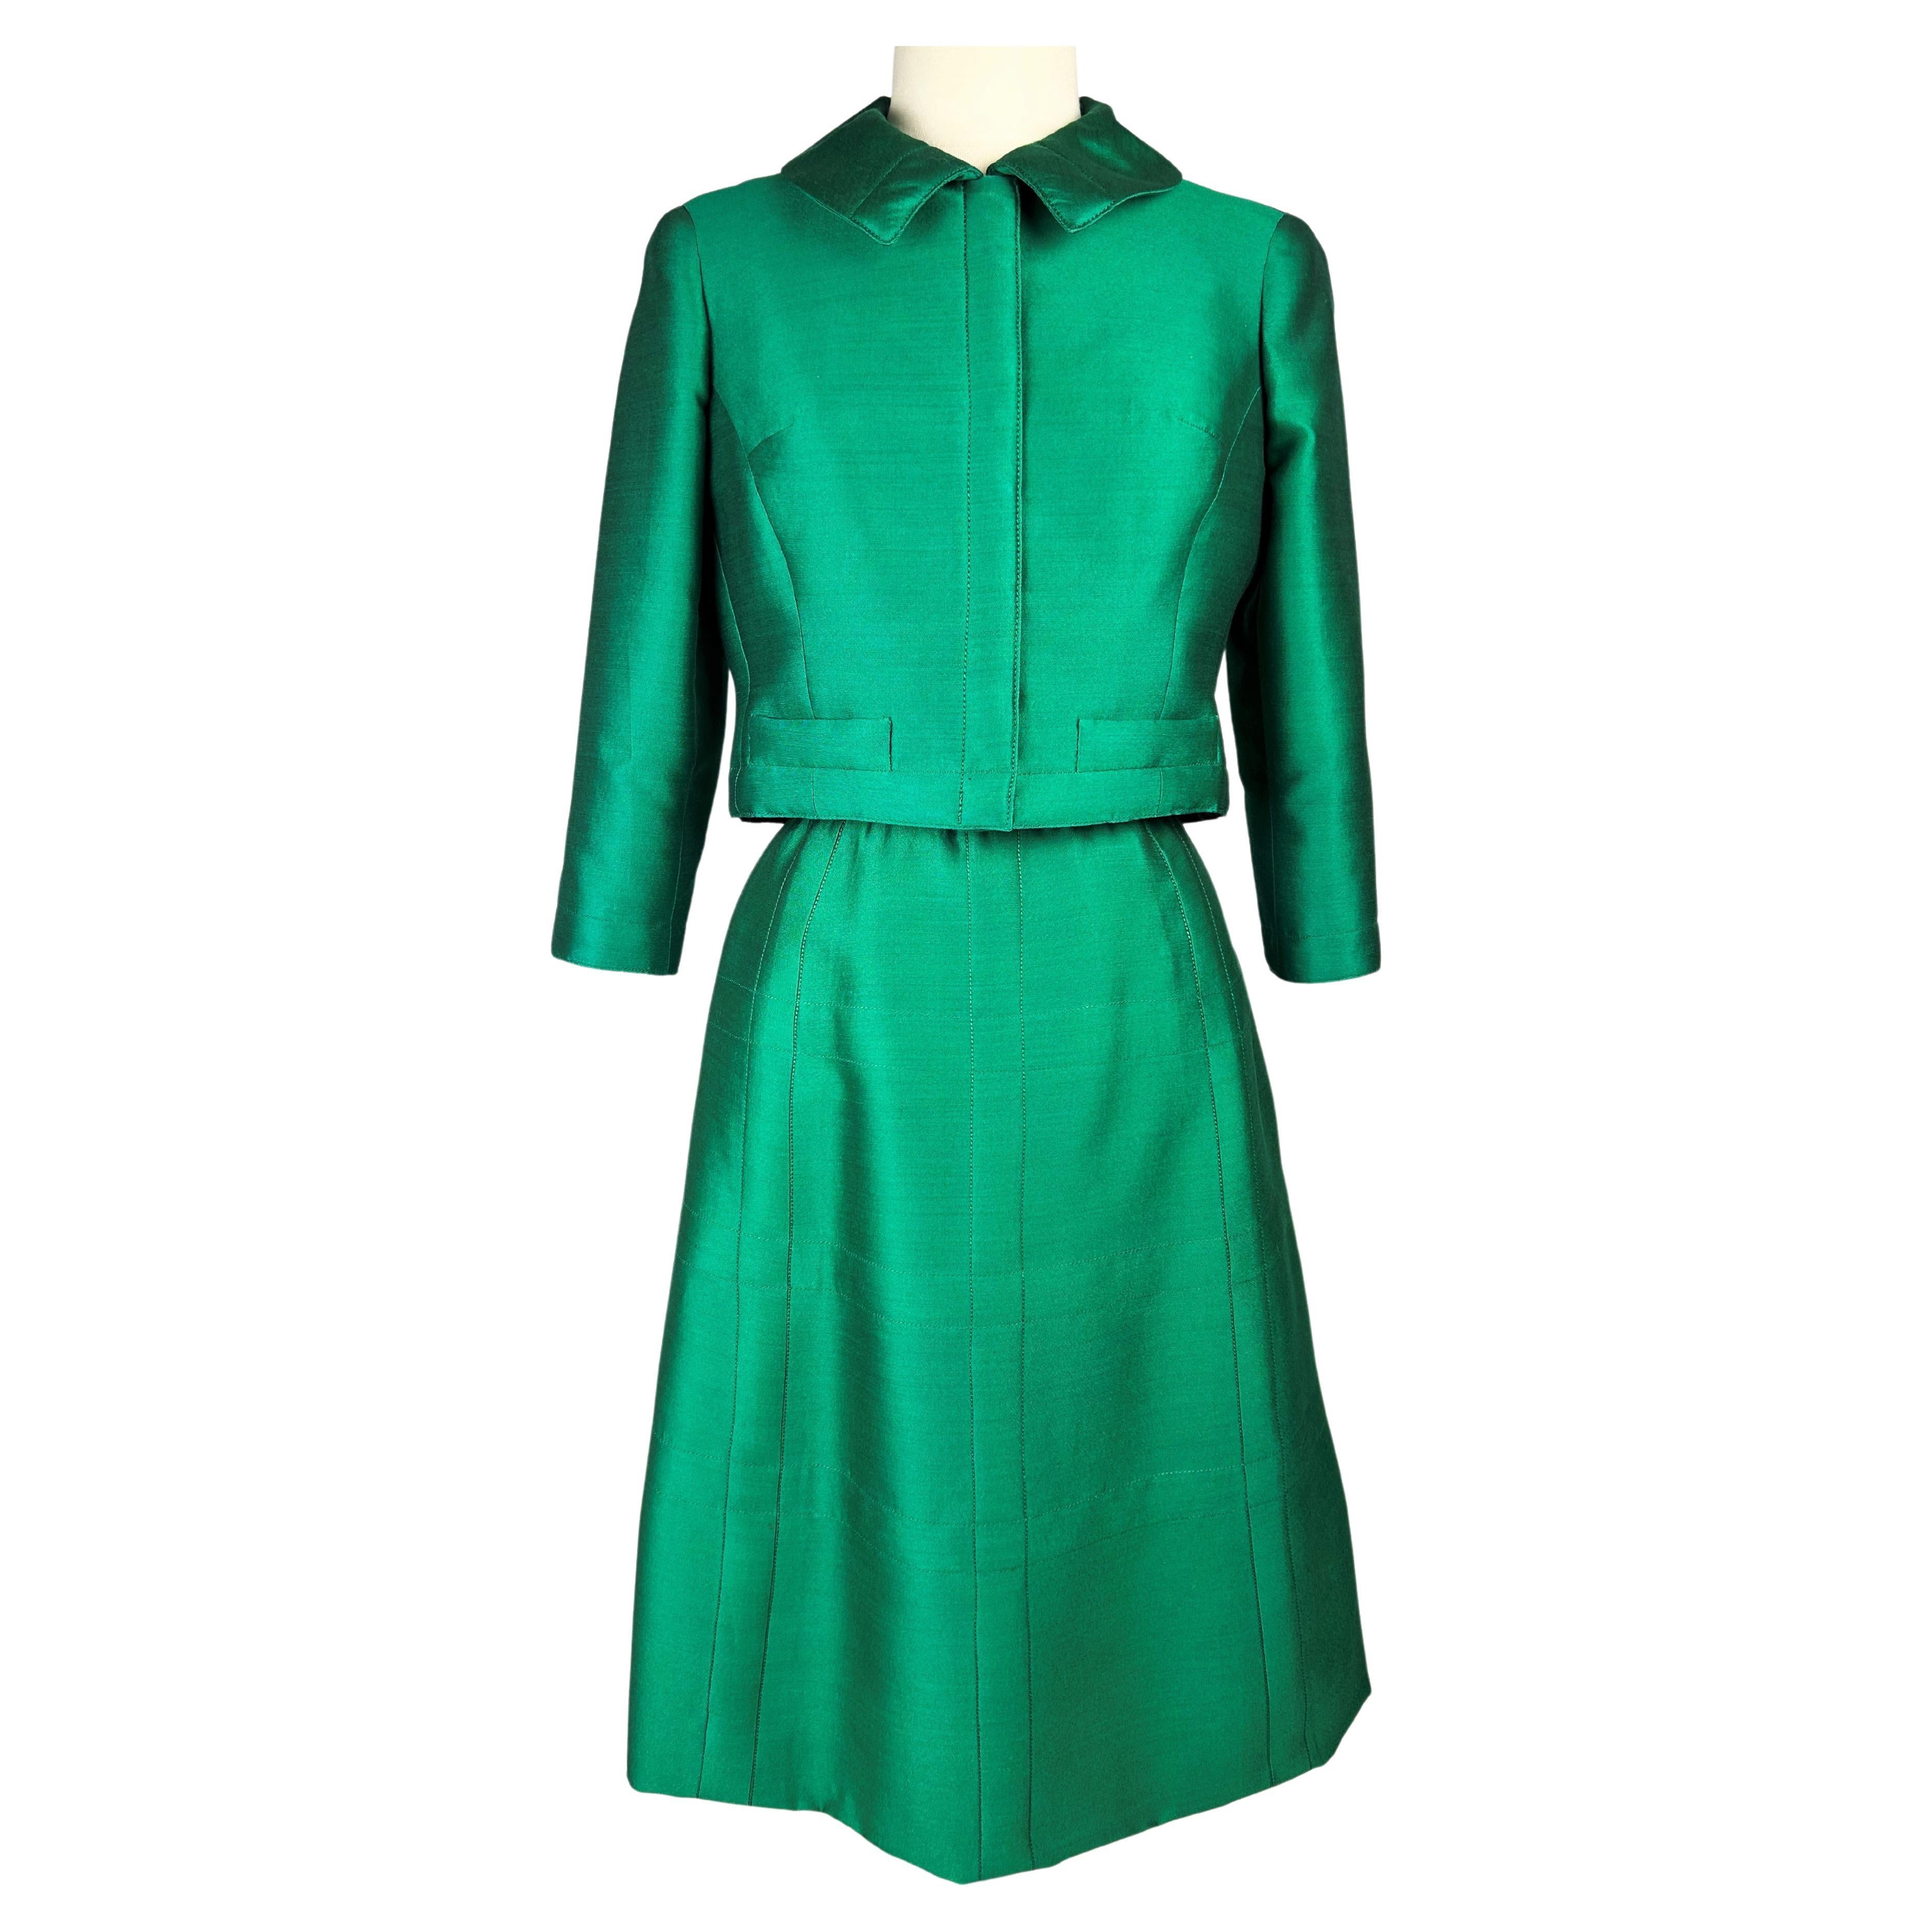 An Emerald Gazar Demi-Couture Skirt Suit by Louis Féraud Circa 1968-1972 For Sale